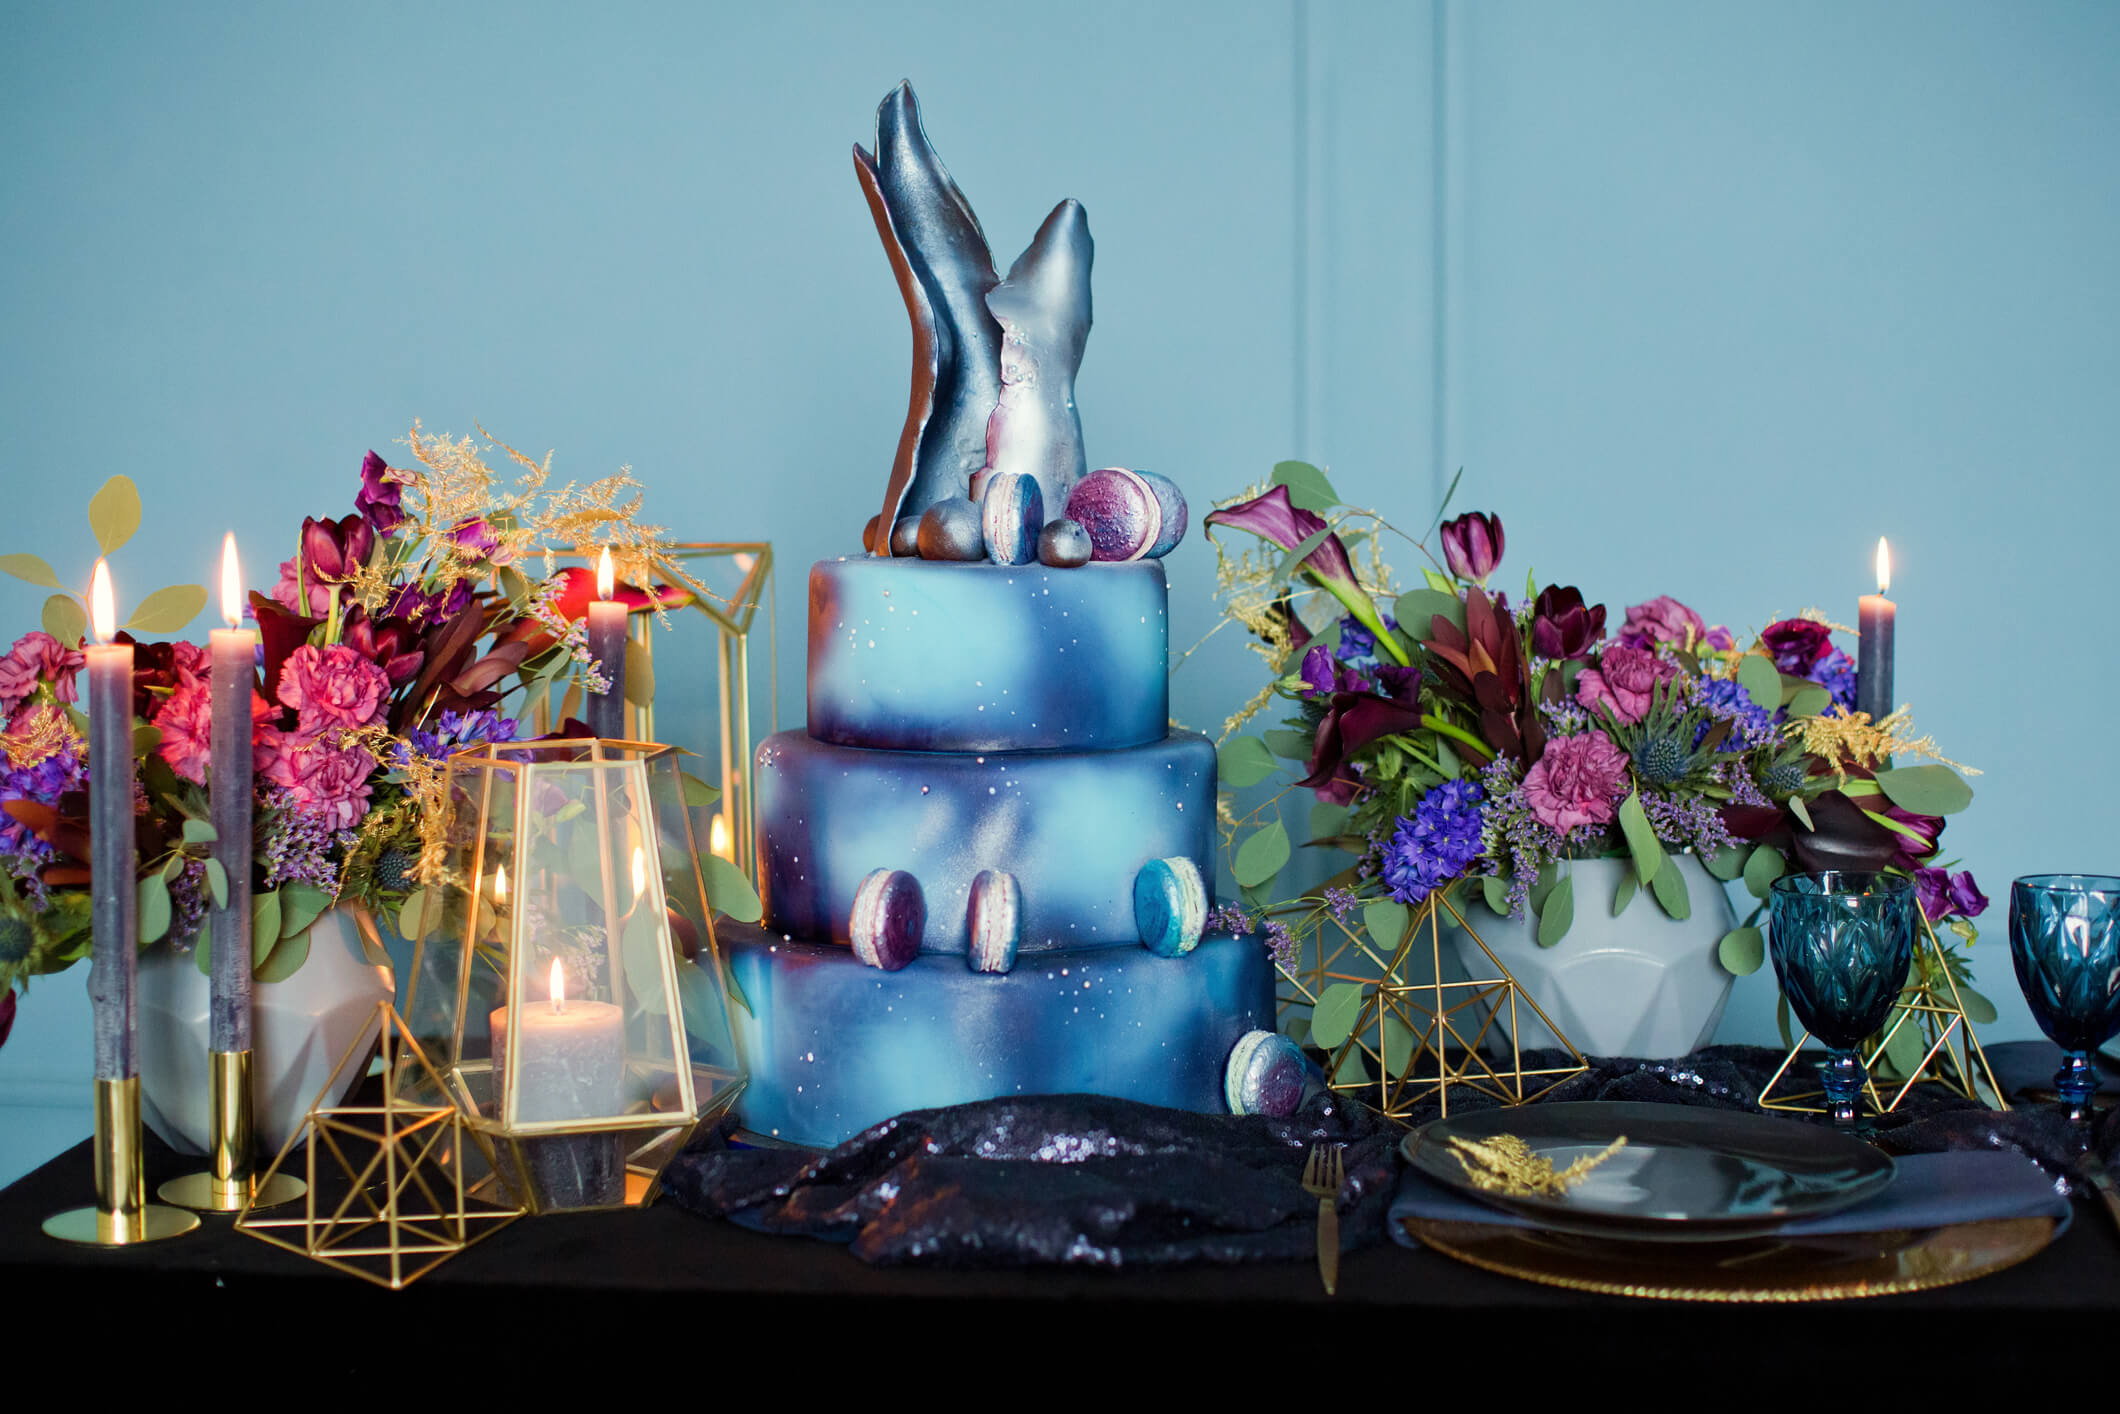 19 Galaxy-Themed Wedding Ideas That Are Out of This World